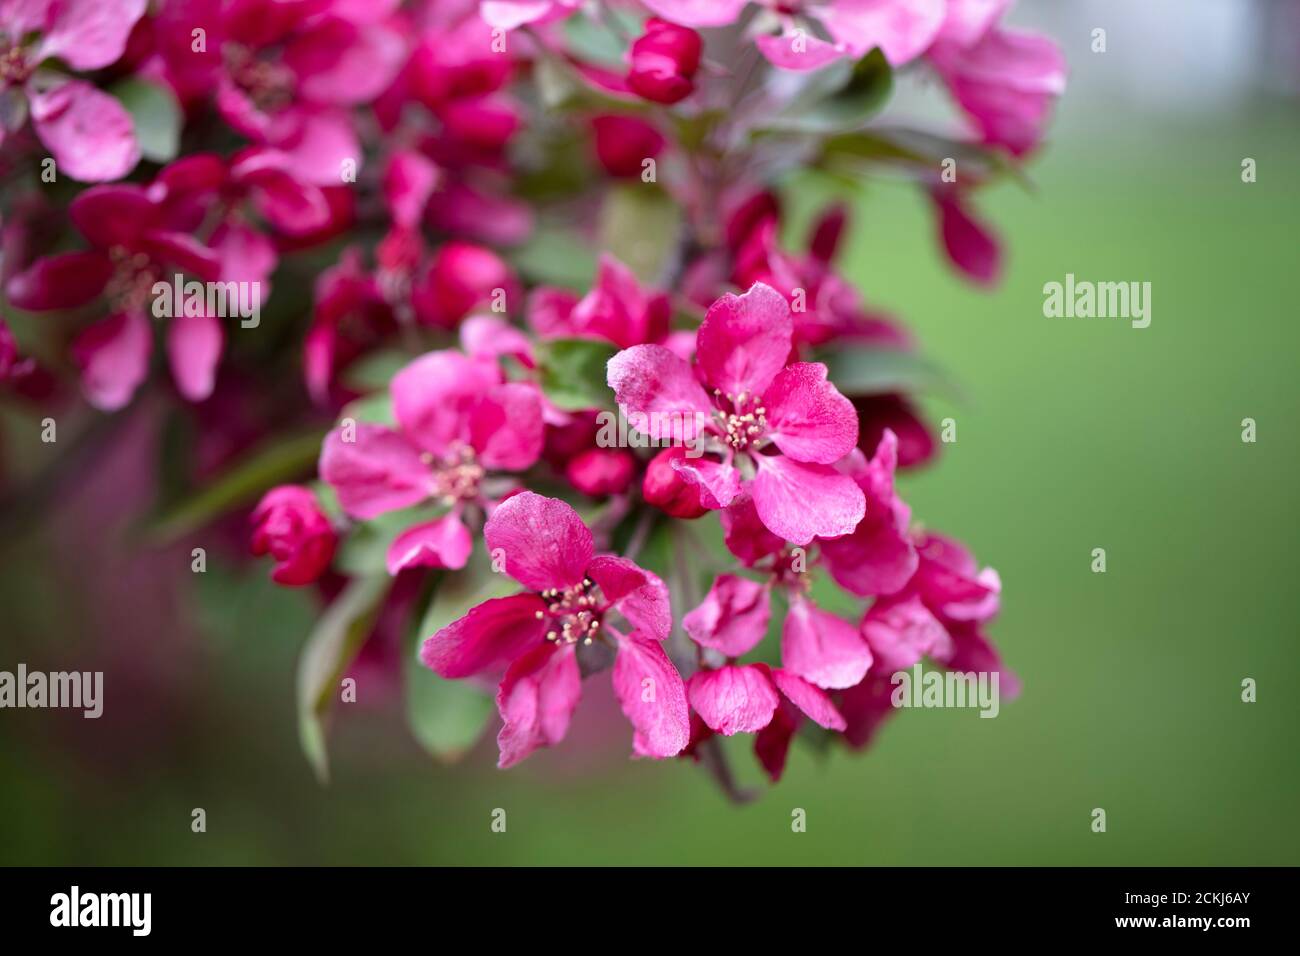 Bright purple red blossoming of a paradise apple tree or crab apple tree in botanical garden. Stock Photo